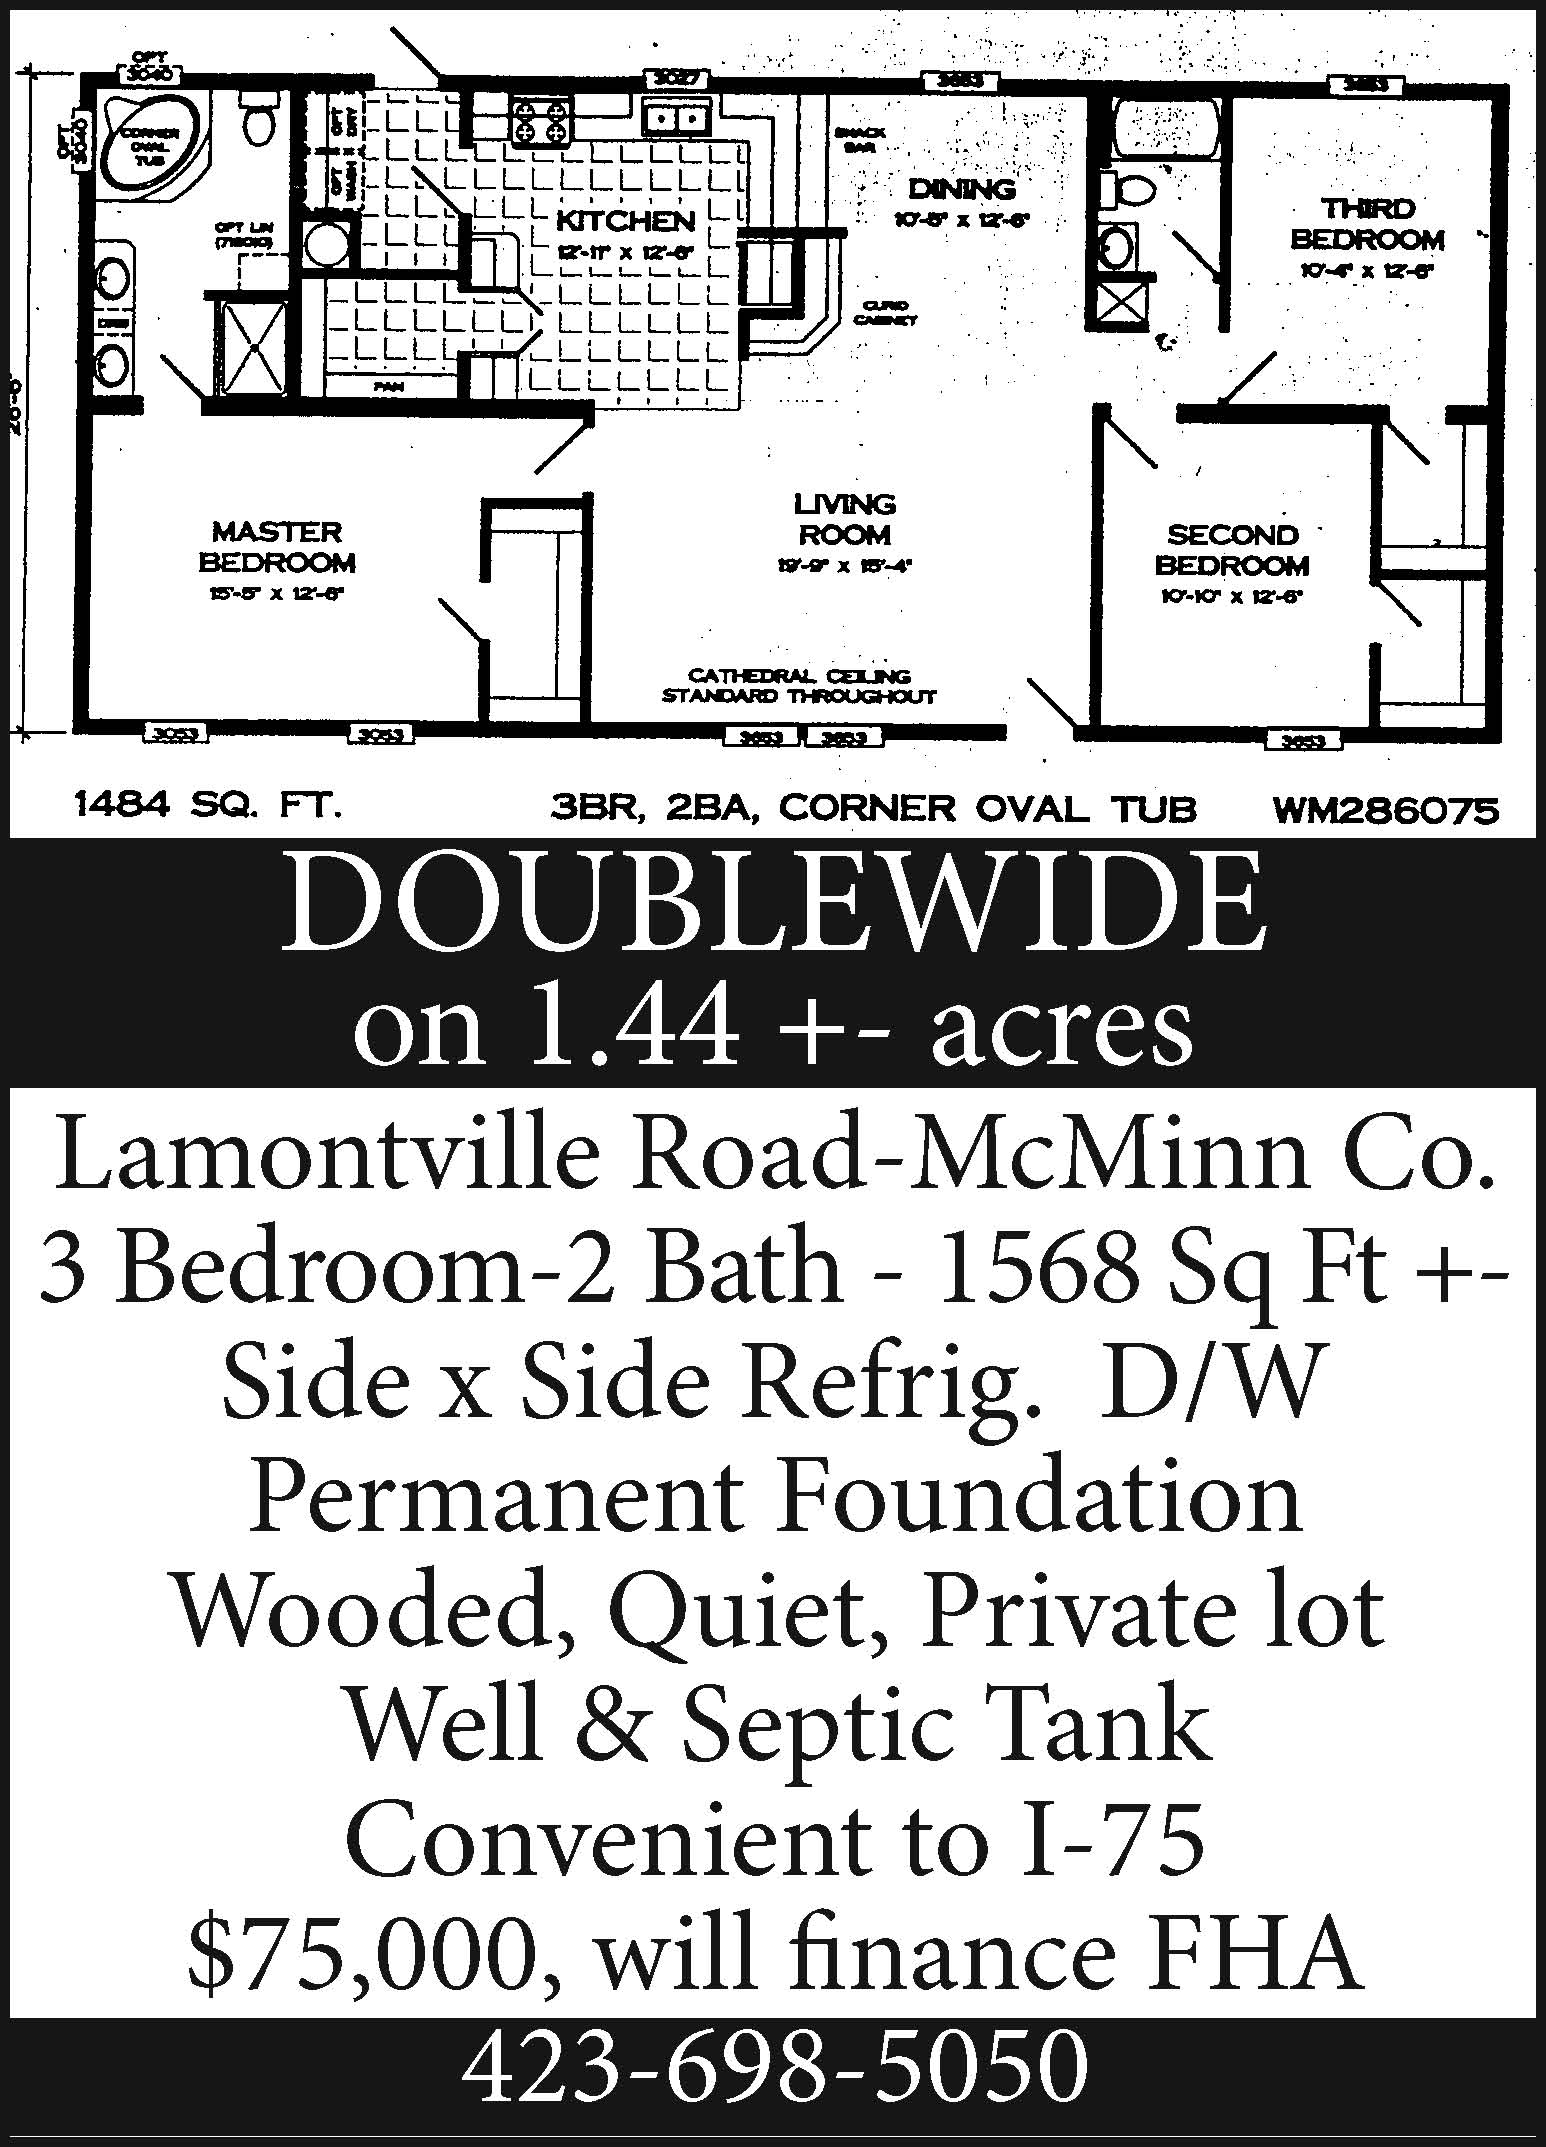 Double Wide on 1.44 acres on Lamontville Road